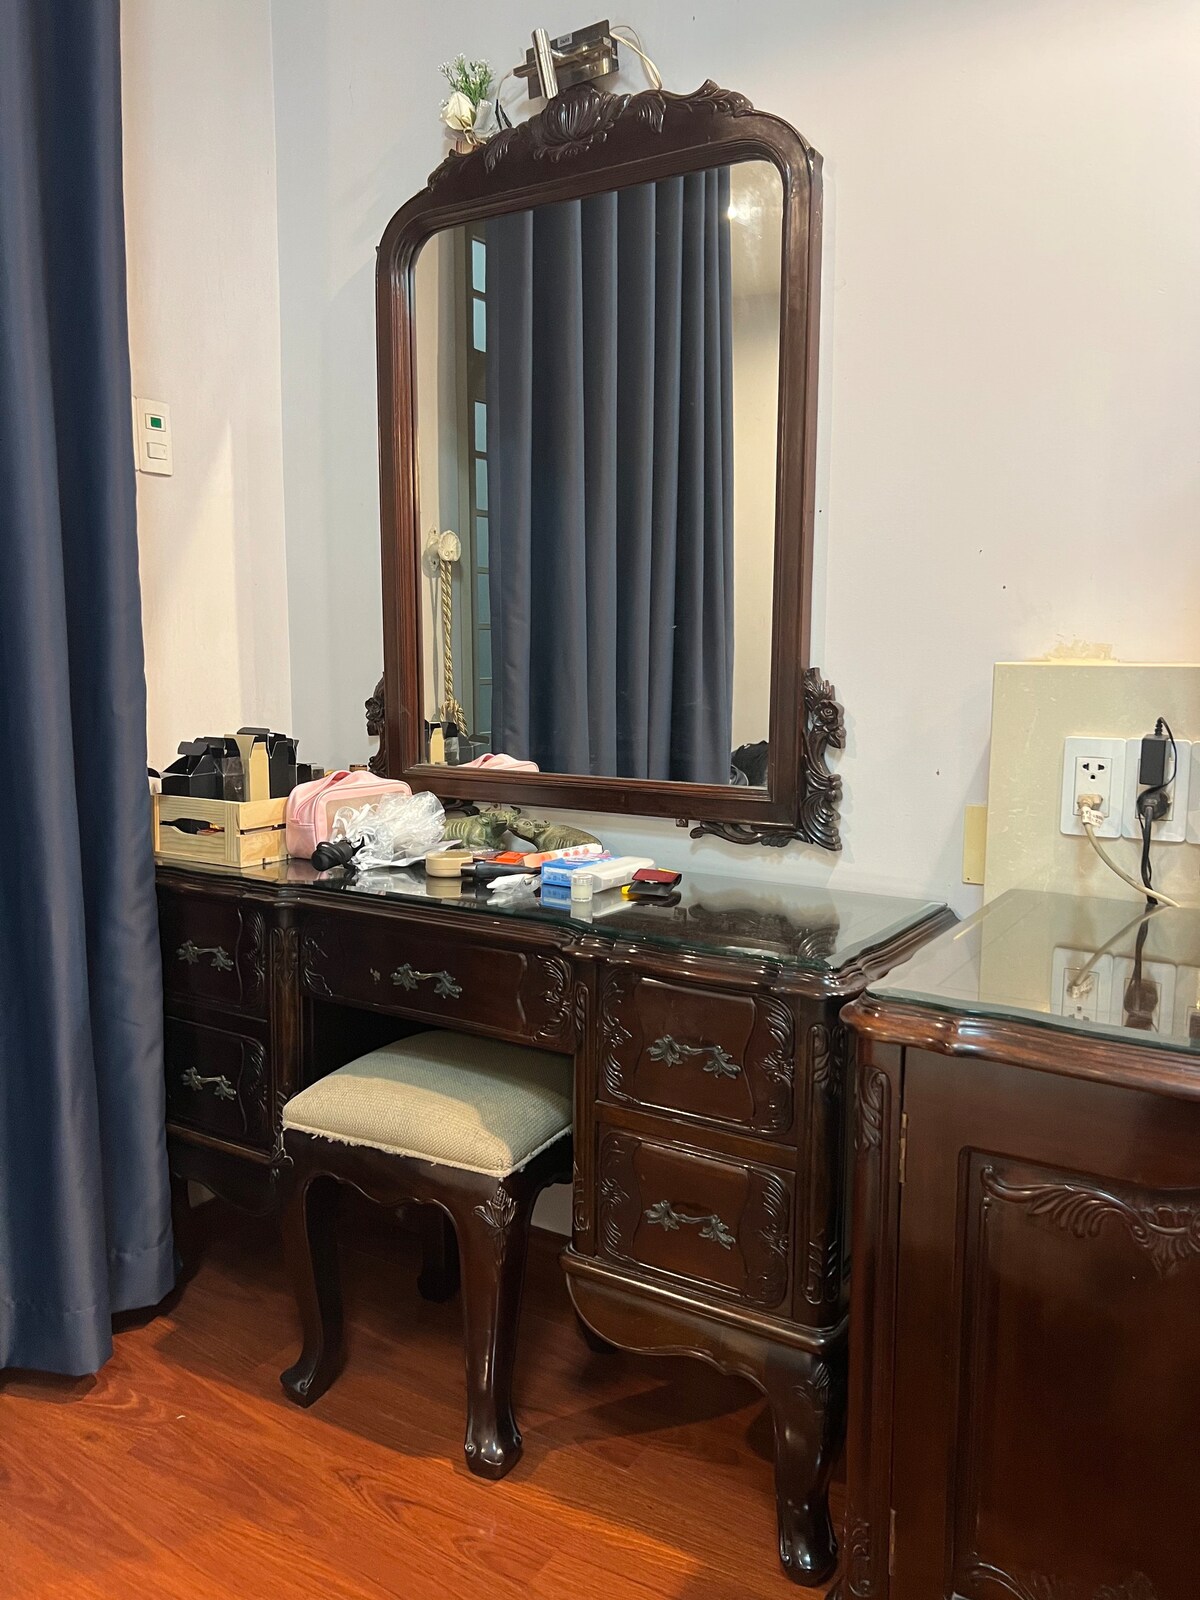 Room for rent in hochiminh city